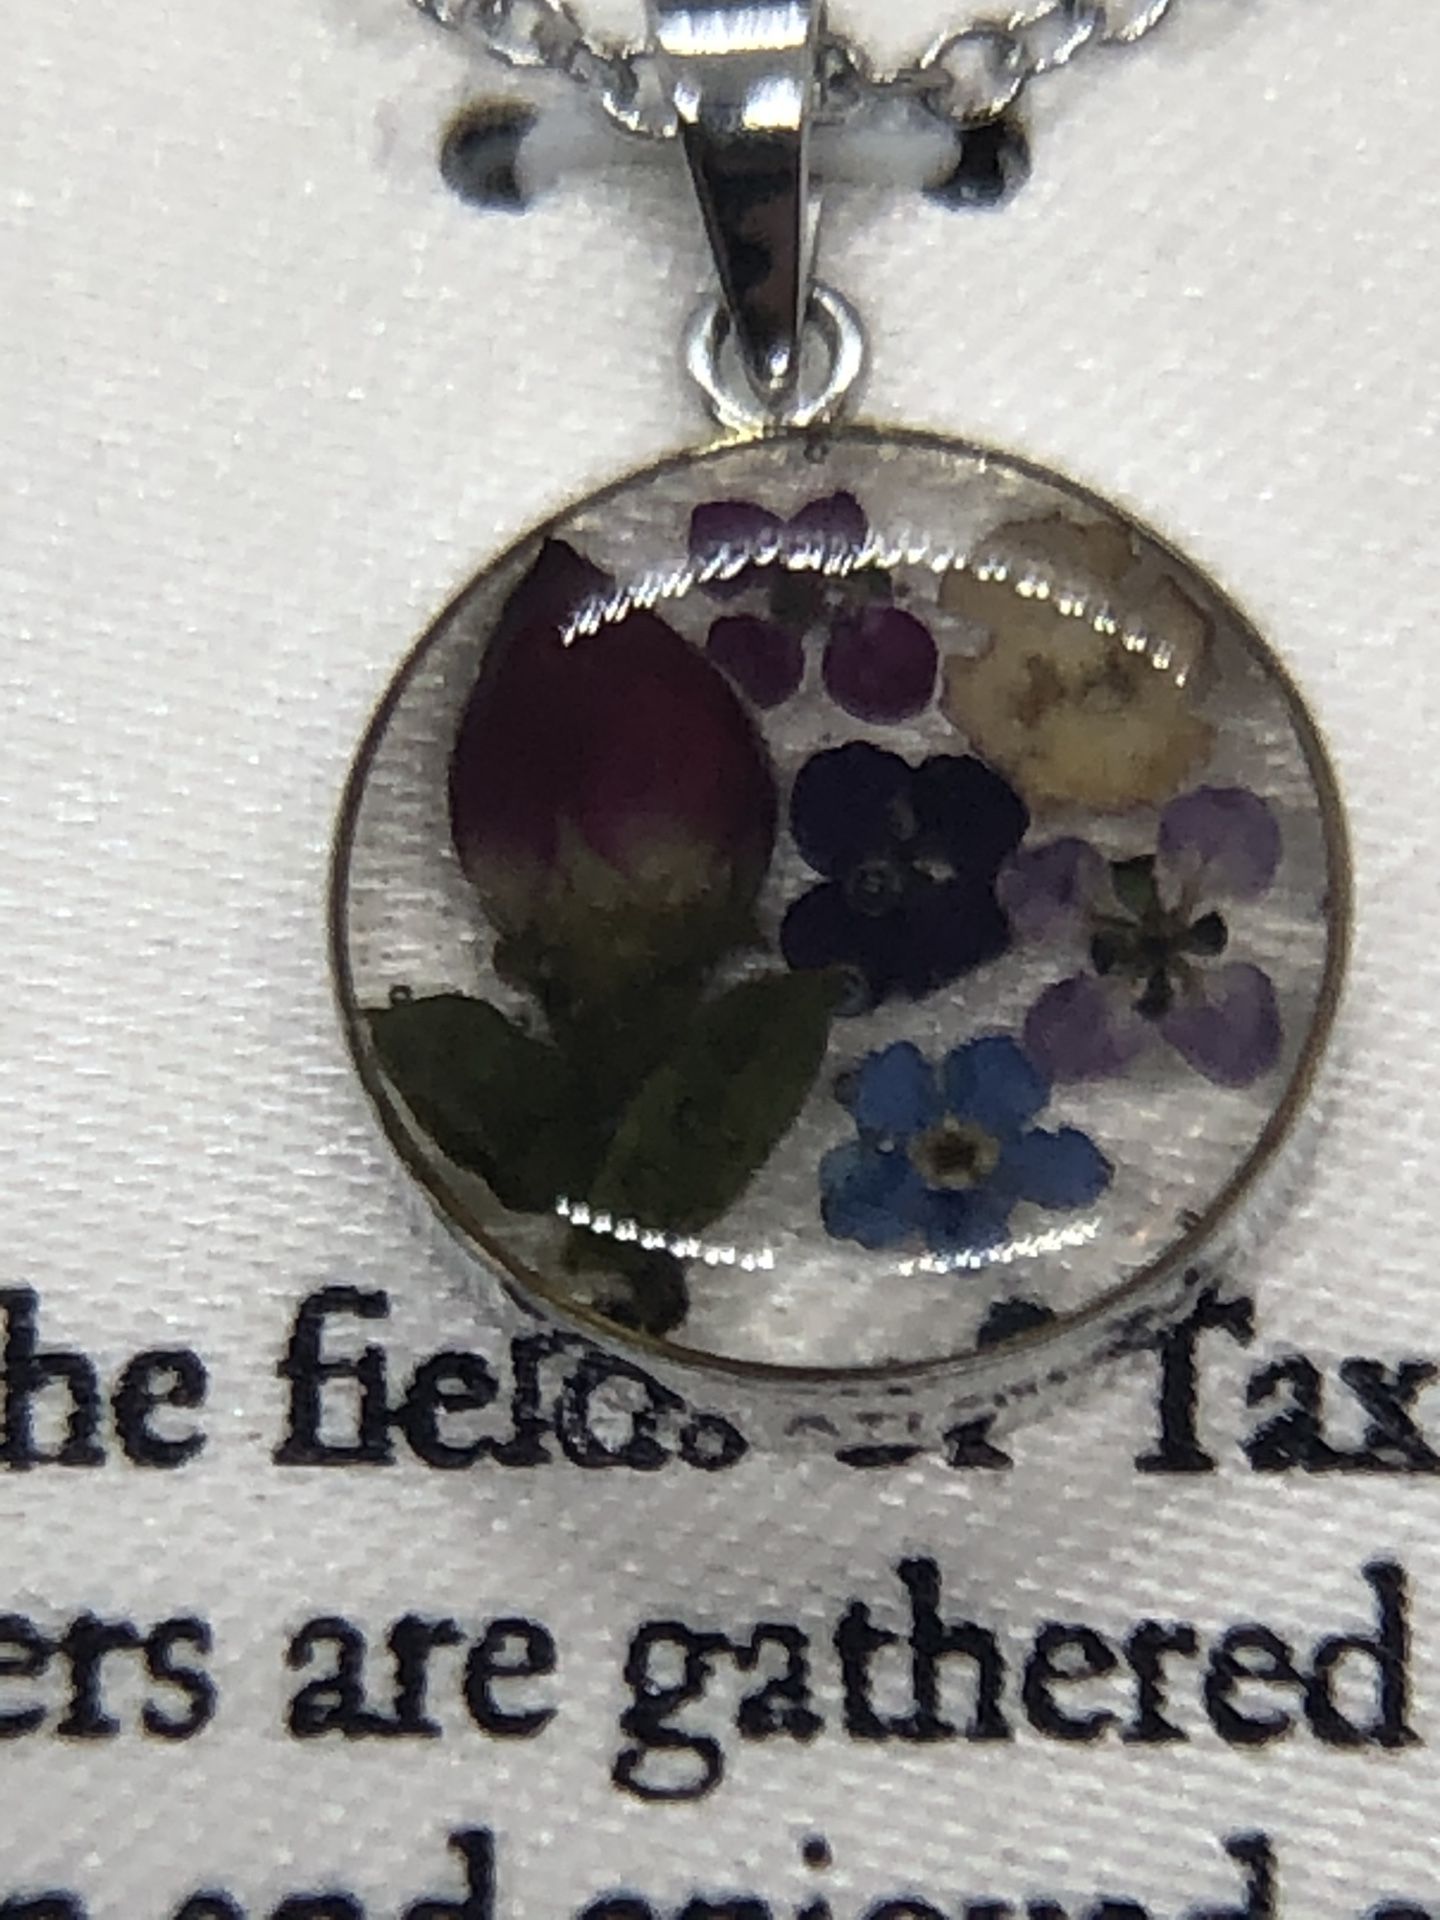 Pressed flowers necklace